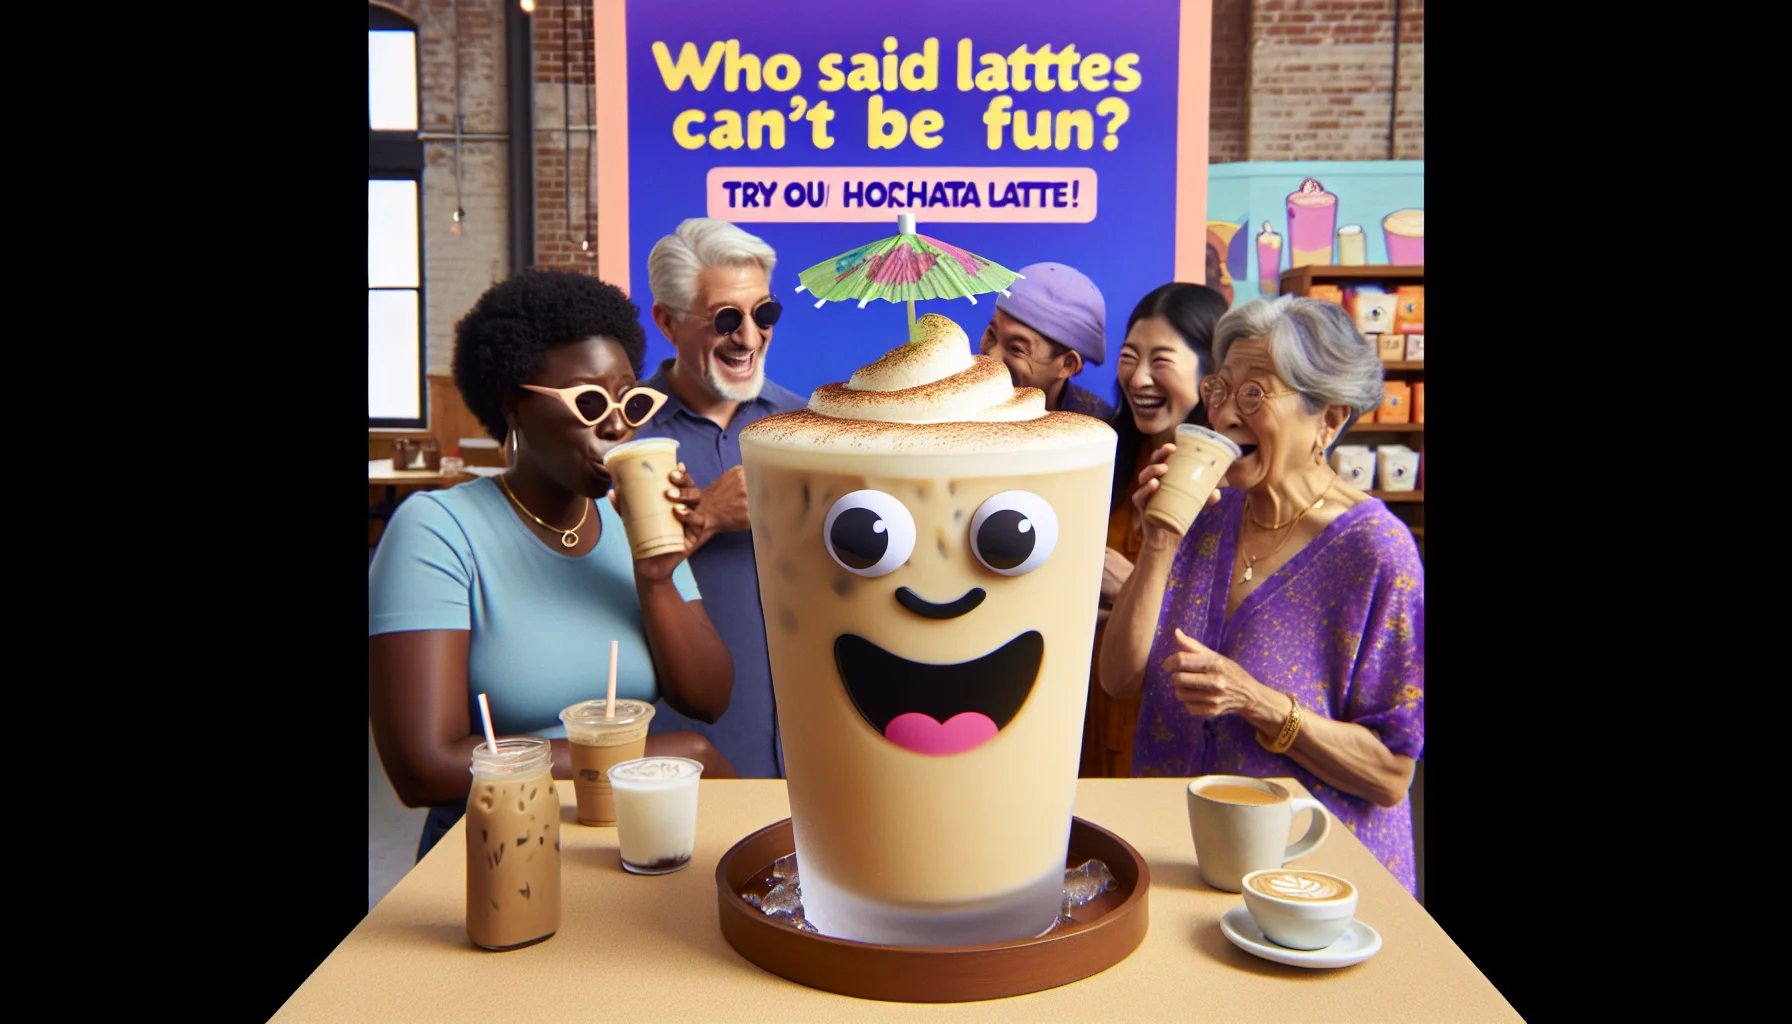 Generate an image of a delightful scene featuring an icy, creamy glass of horchata latte with a wide-eyed, grinning face drawn on. It's surrounded by other coffee drinks that appear slightly less exciting, without faces and not as frosty. The playful horchata latte is lifting a tiny, colorful paper umbrella, suggesting it's more fun to drink. Display words in the backdrop stating: 'Who said Lattes can't be fun? Try Our Horchata Latte!' Meanwhile, a diverse group of people: a black woman sipping her coffee amusedly while watching the scene, a South Asian man laughing, and a Hispanic elderly couple looking intrigued are present, all hinting about the entertaining horchata latte.